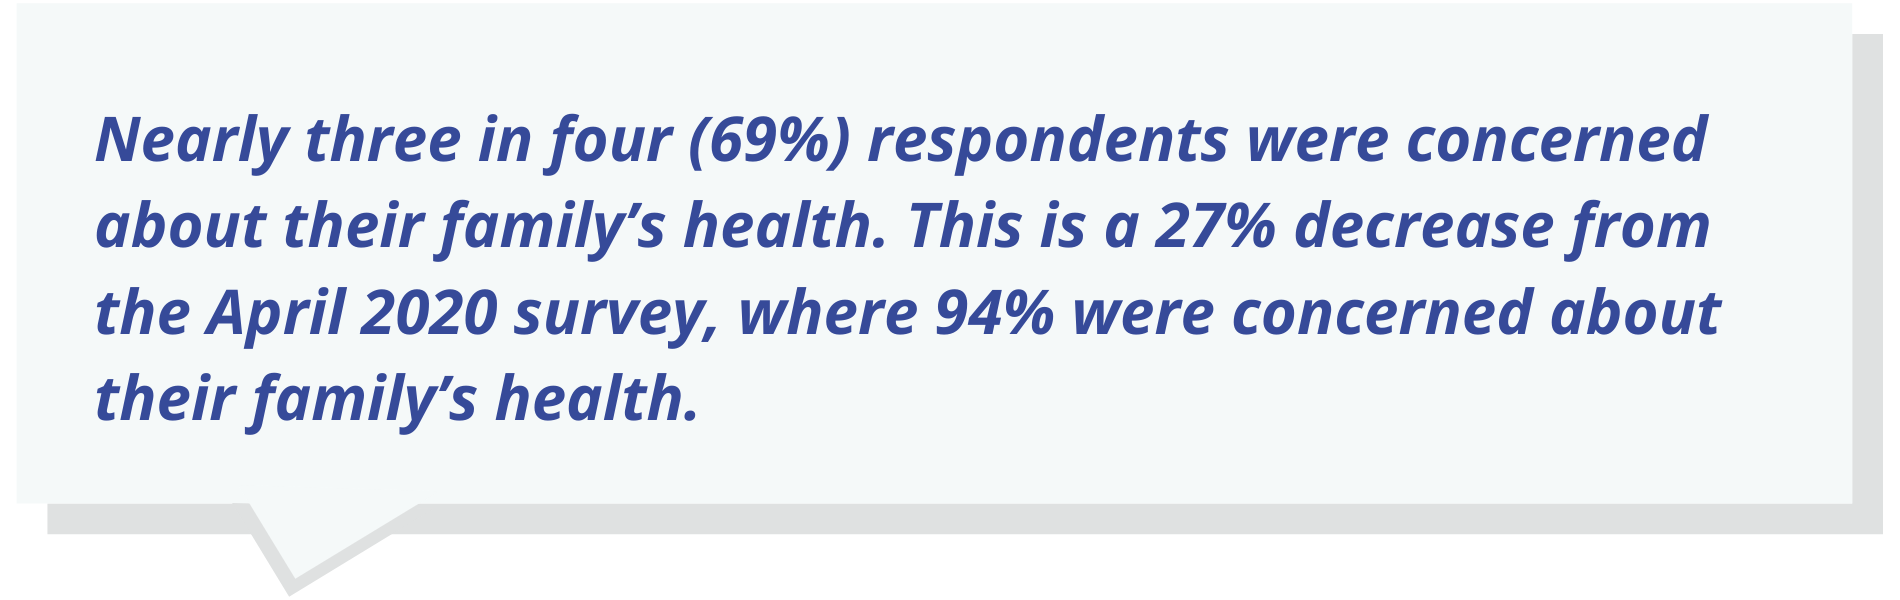 Nearly three in four (69%) respondents were concerned about their family’s health.   This is a 27% decrease from the April 2020 survey, where 94% were concerned about their family’s health.